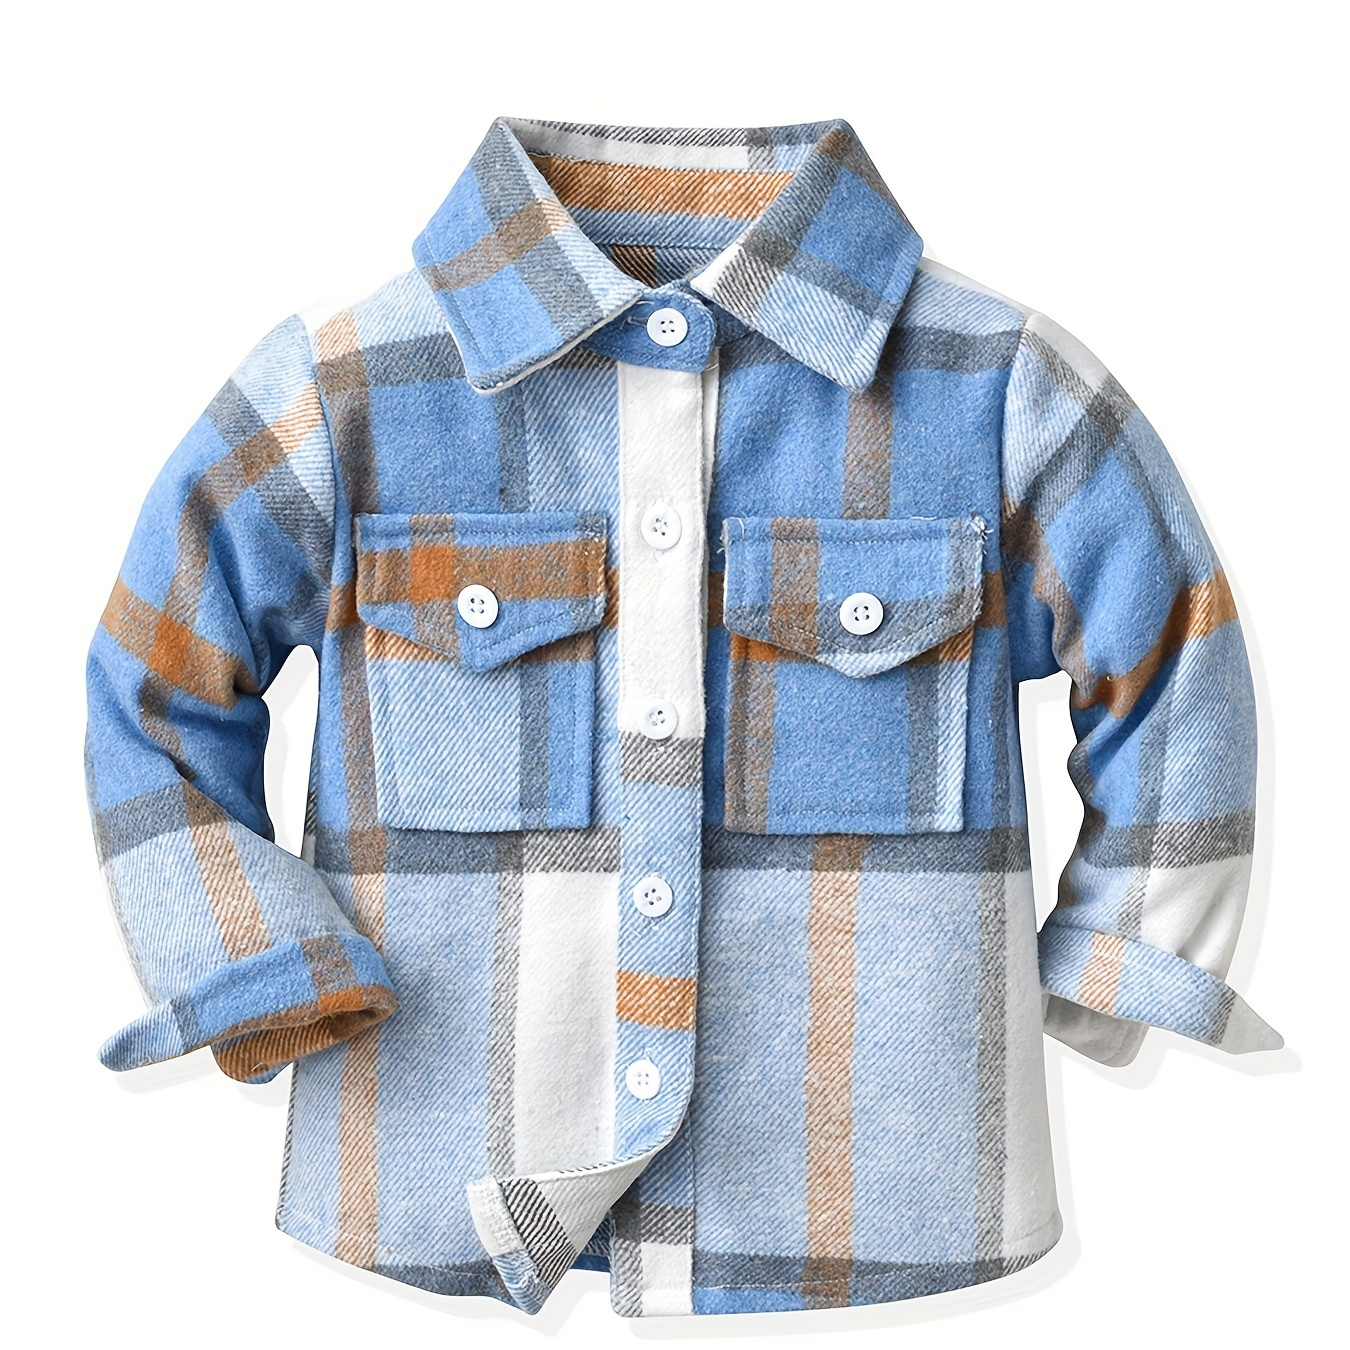 

Little Kids Plaid Jacket Stitching Color Long Sleeve Button Down Flannel Preppy Shirt Autumn Coat Outwear For Kid